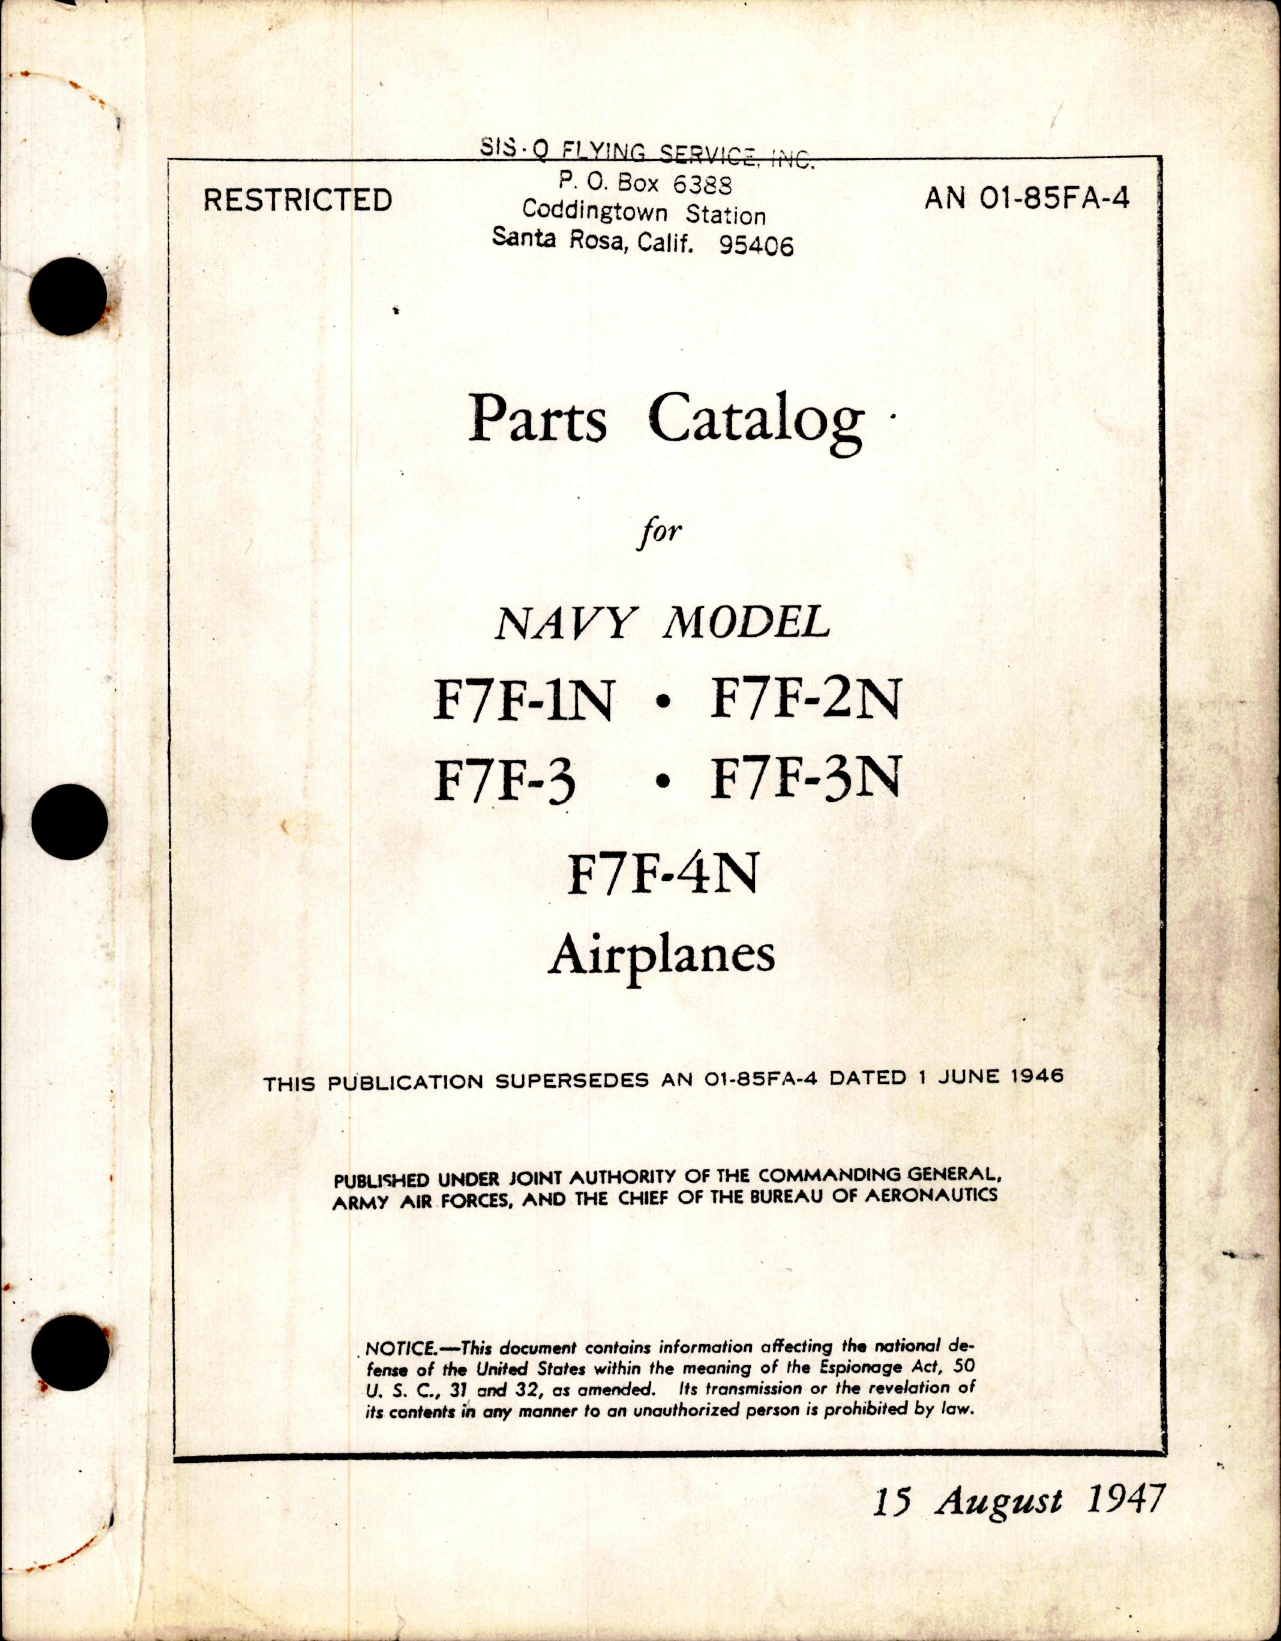 Sample page 1 from AirCorps Library document: Parts Catalog for F7F-1N, F7F-2N, F7F-3, F7F-3N, and F7F-4N